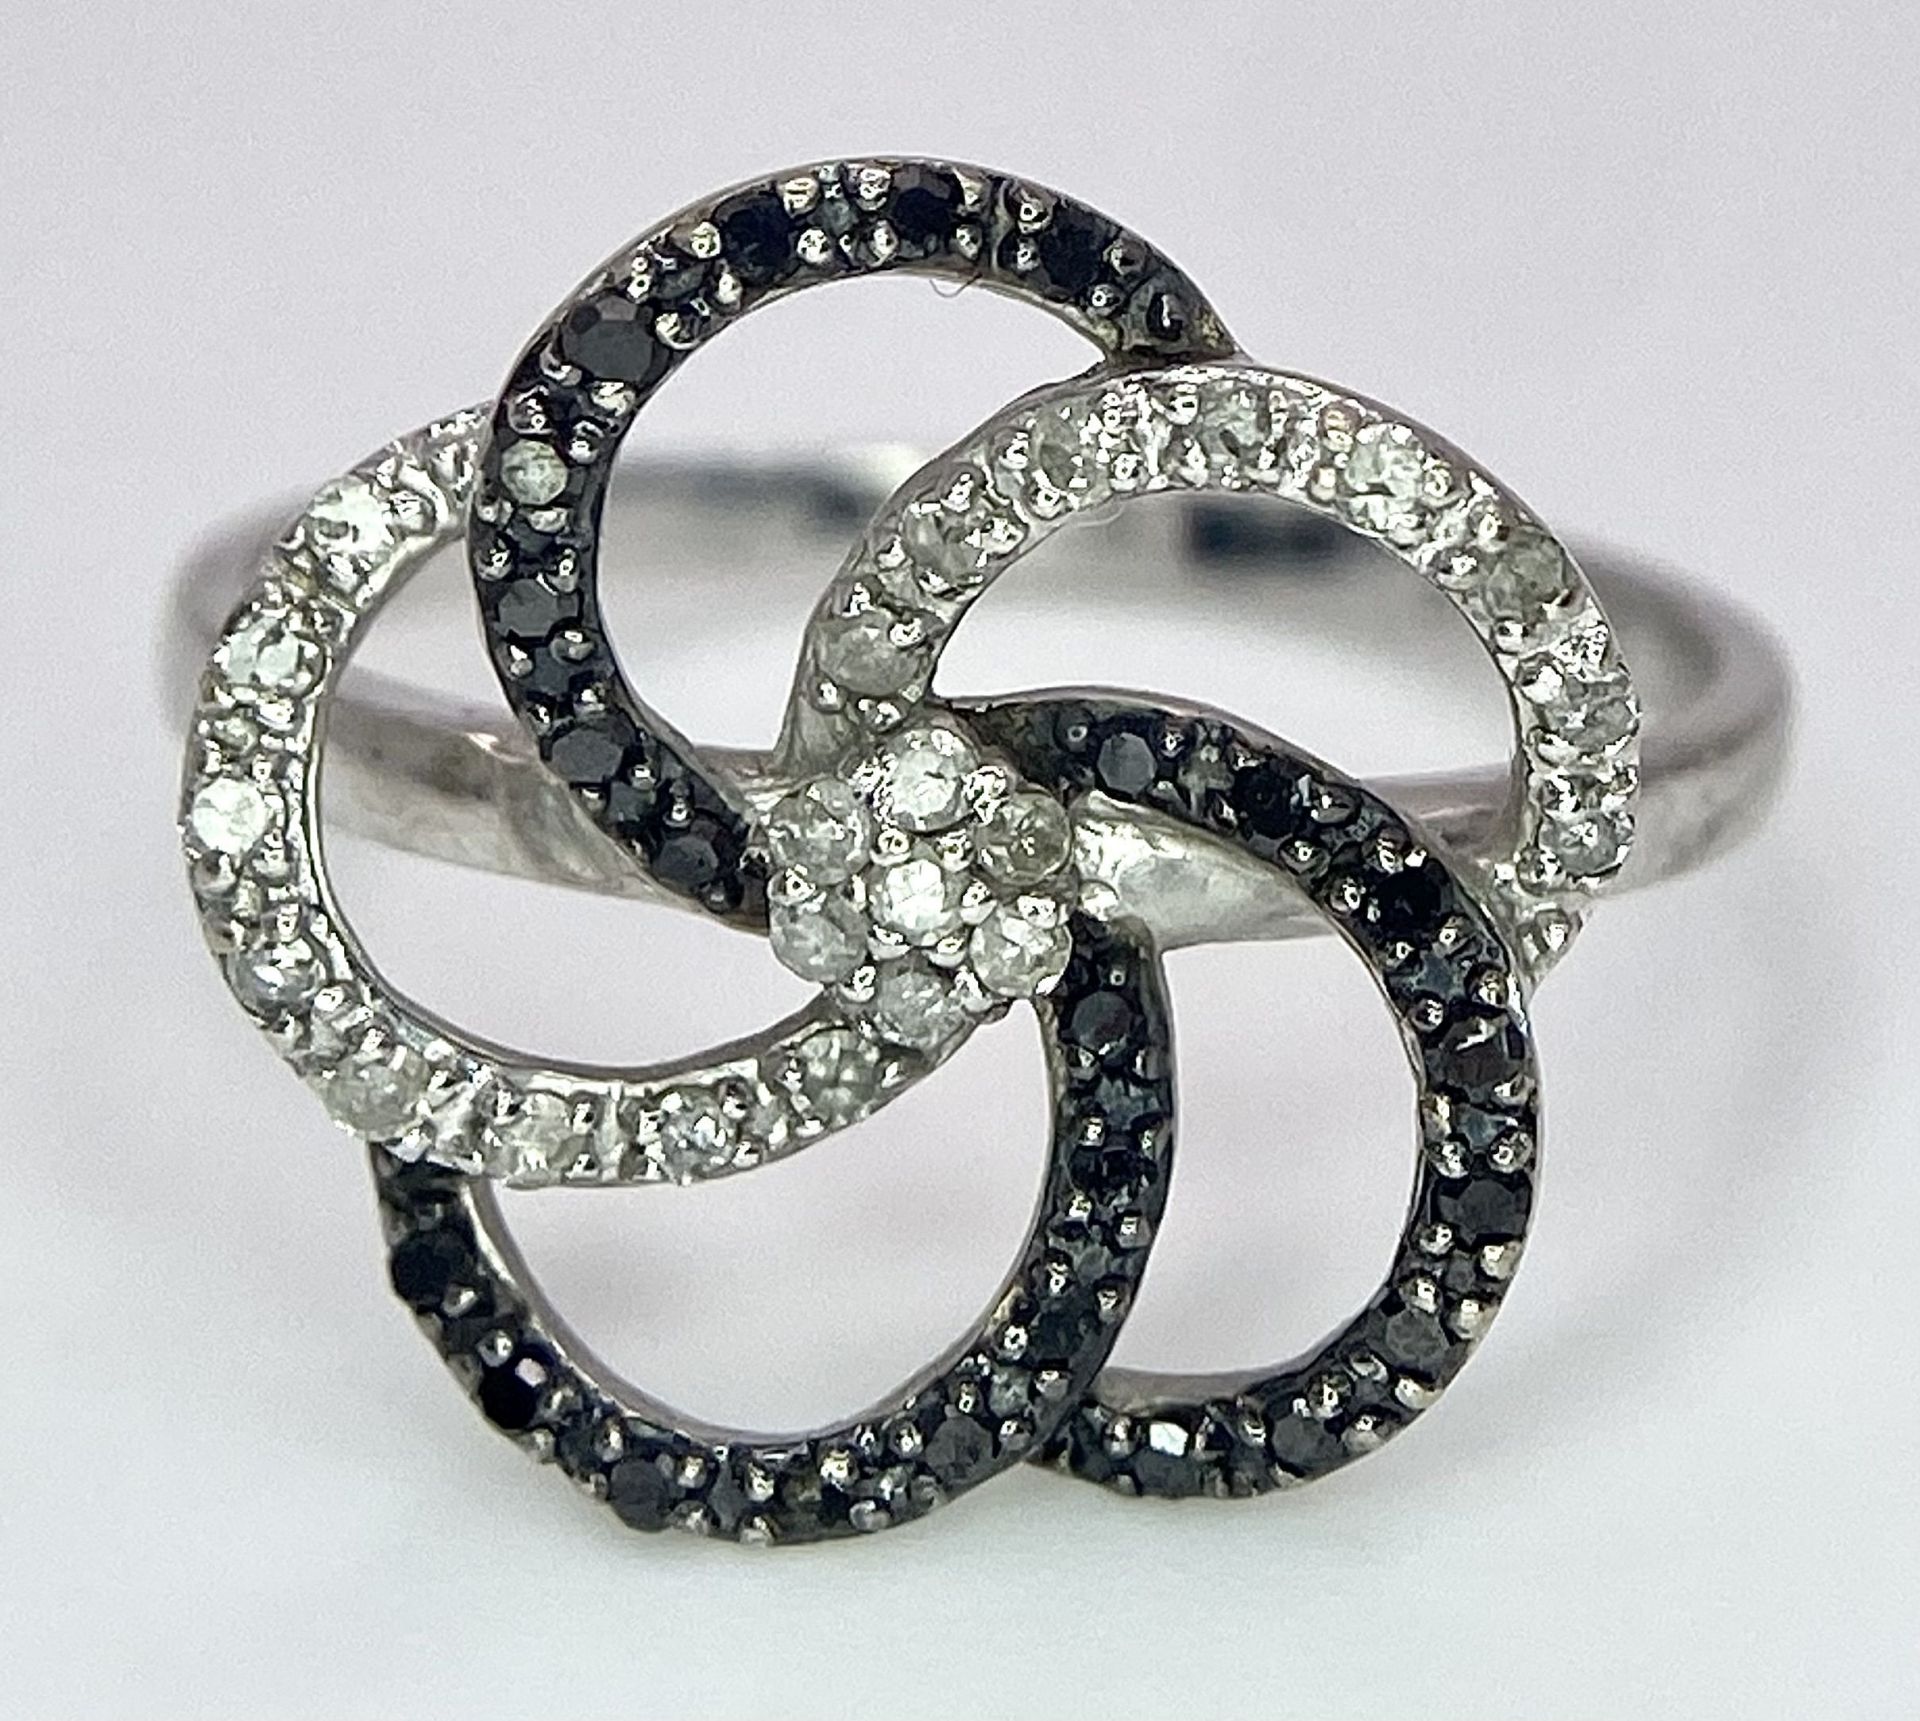 A 9K White Gold Black ad White Diamond Decorative Floral Ring. Size N. 2g total weight. - Image 3 of 7